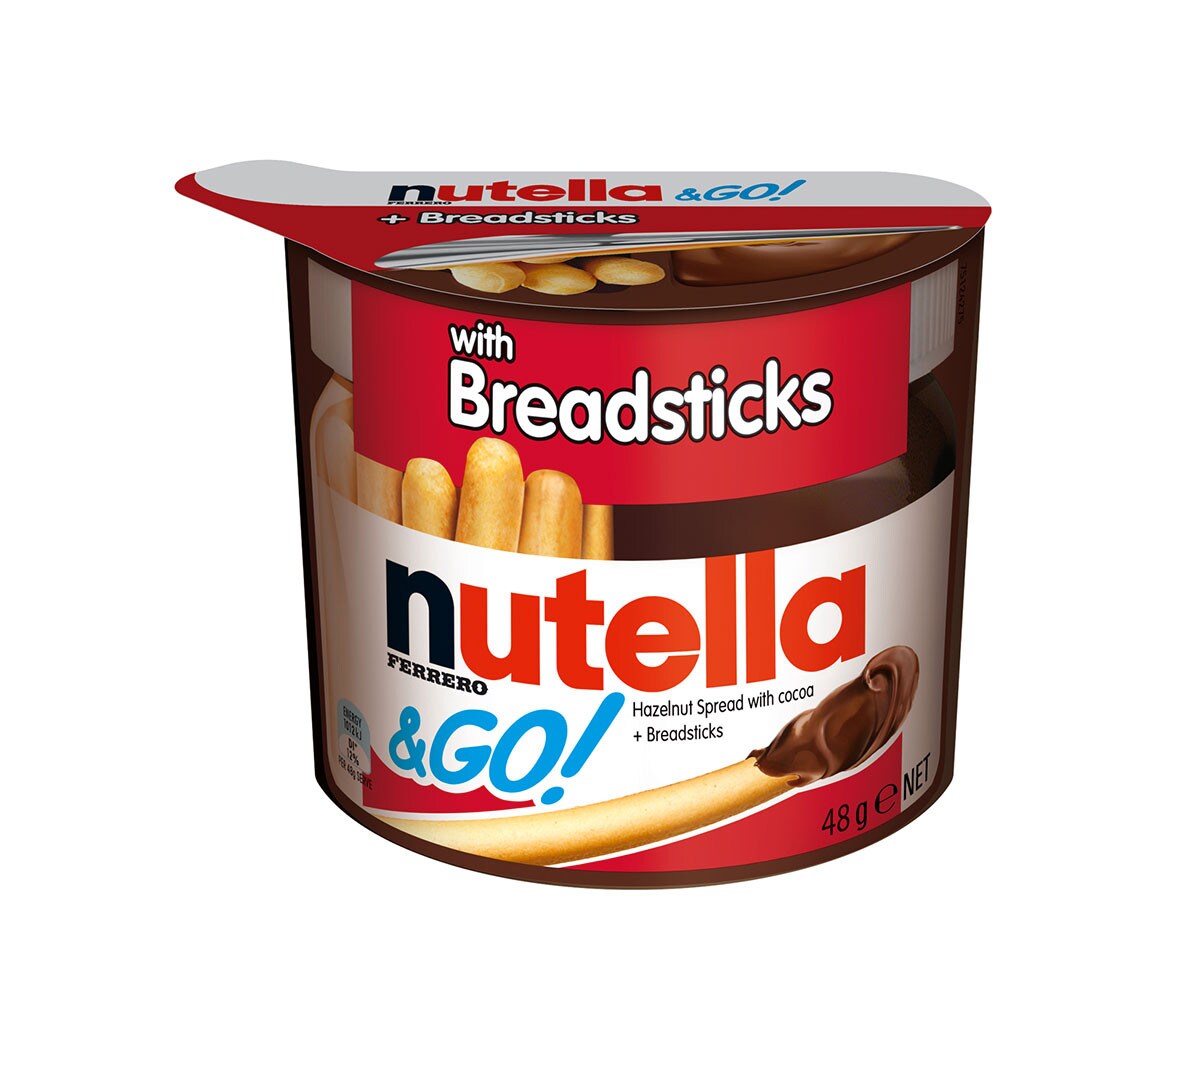 Nutella & GO! with Breadsticks